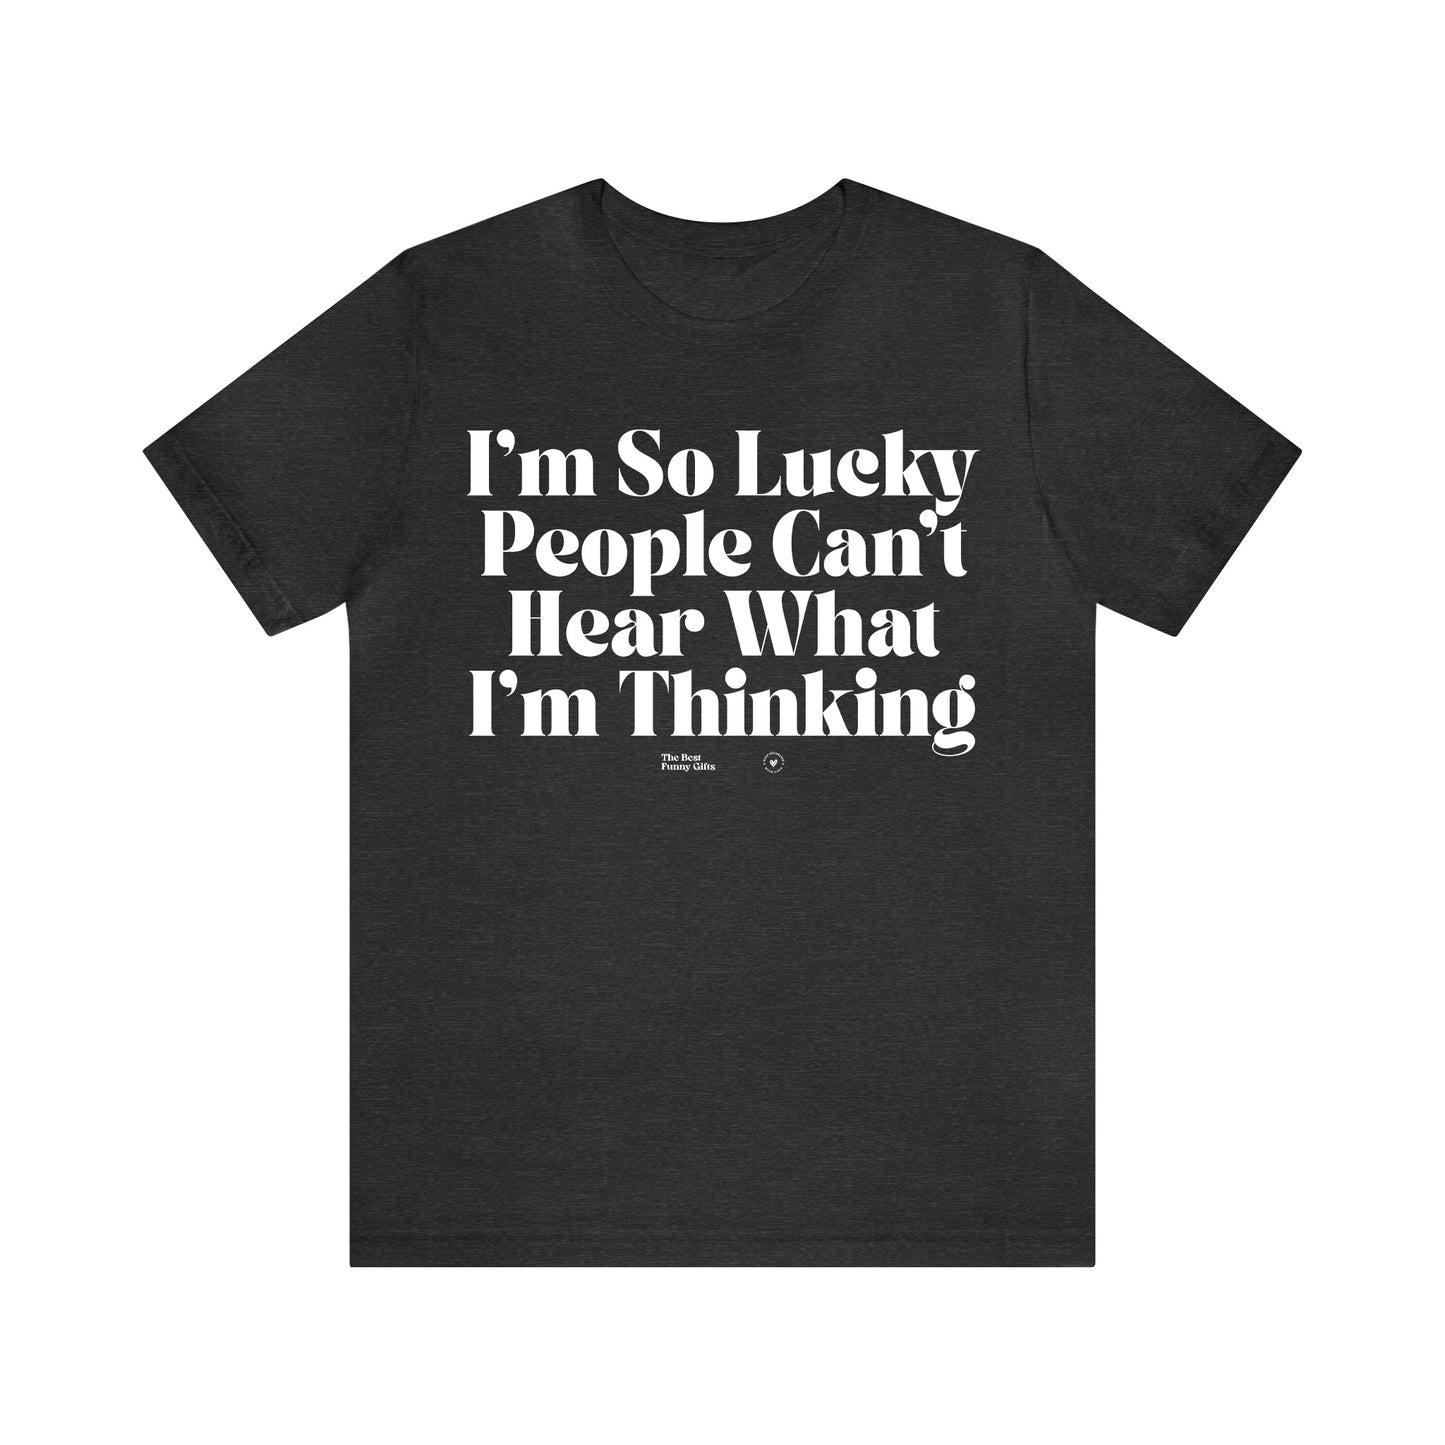 Funny Shirts for Women - I'm So Lucky People Can't Hear What I'm Thinking - Women’s T Shirts